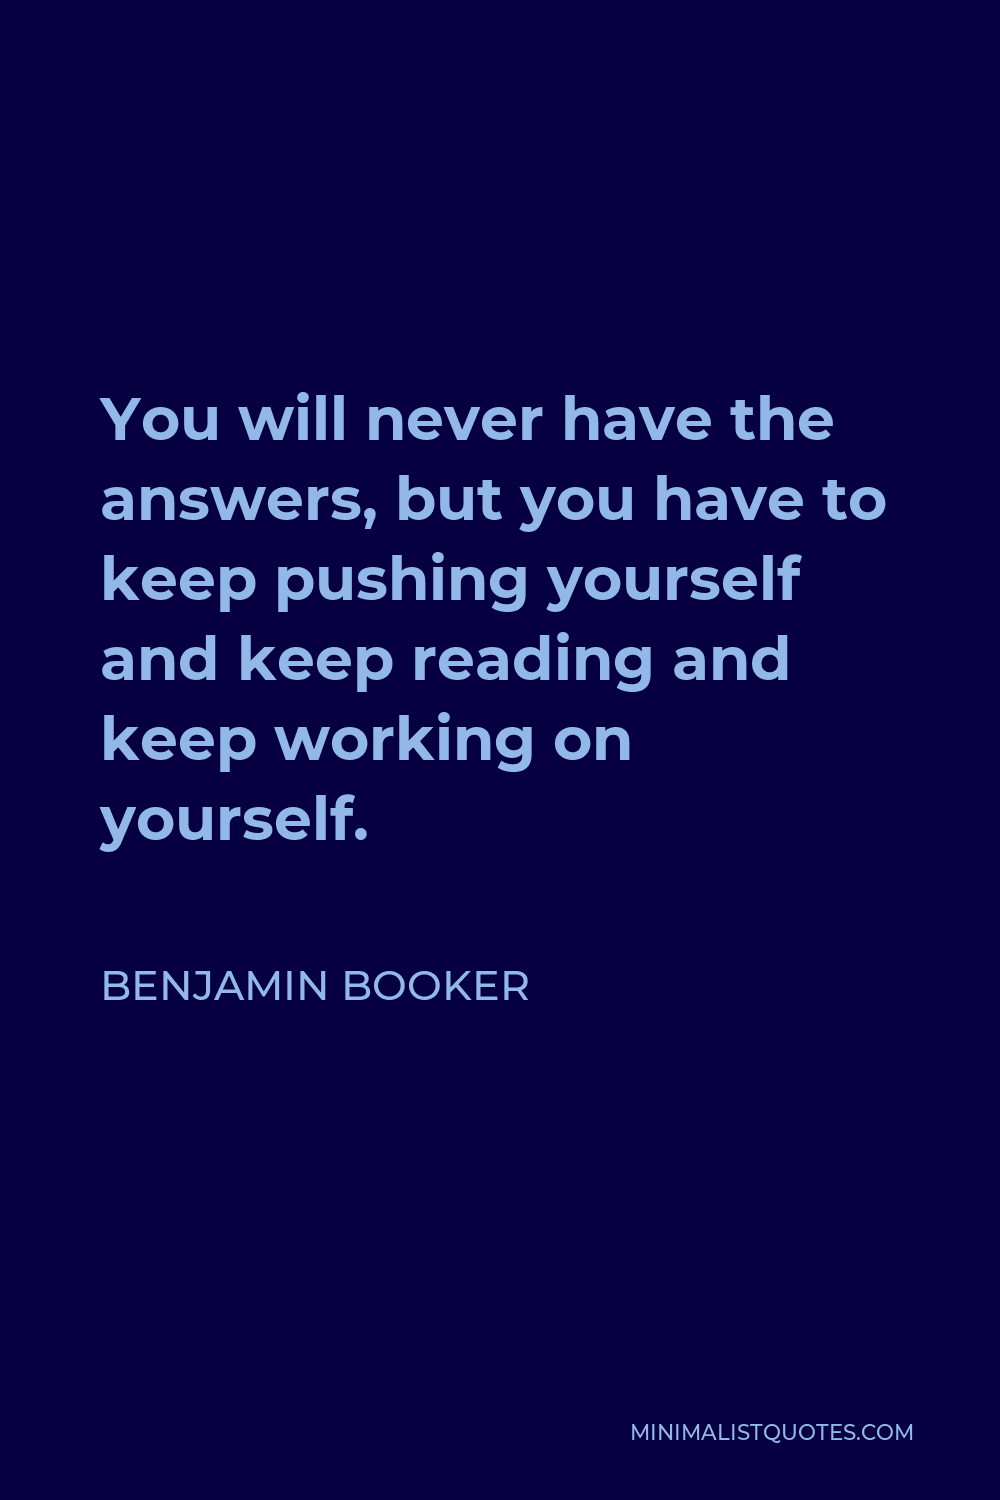 Benjamin Booker Quote - You will never have the answers, but you have to keep pushing yourself and keep reading and keep working on yourself.